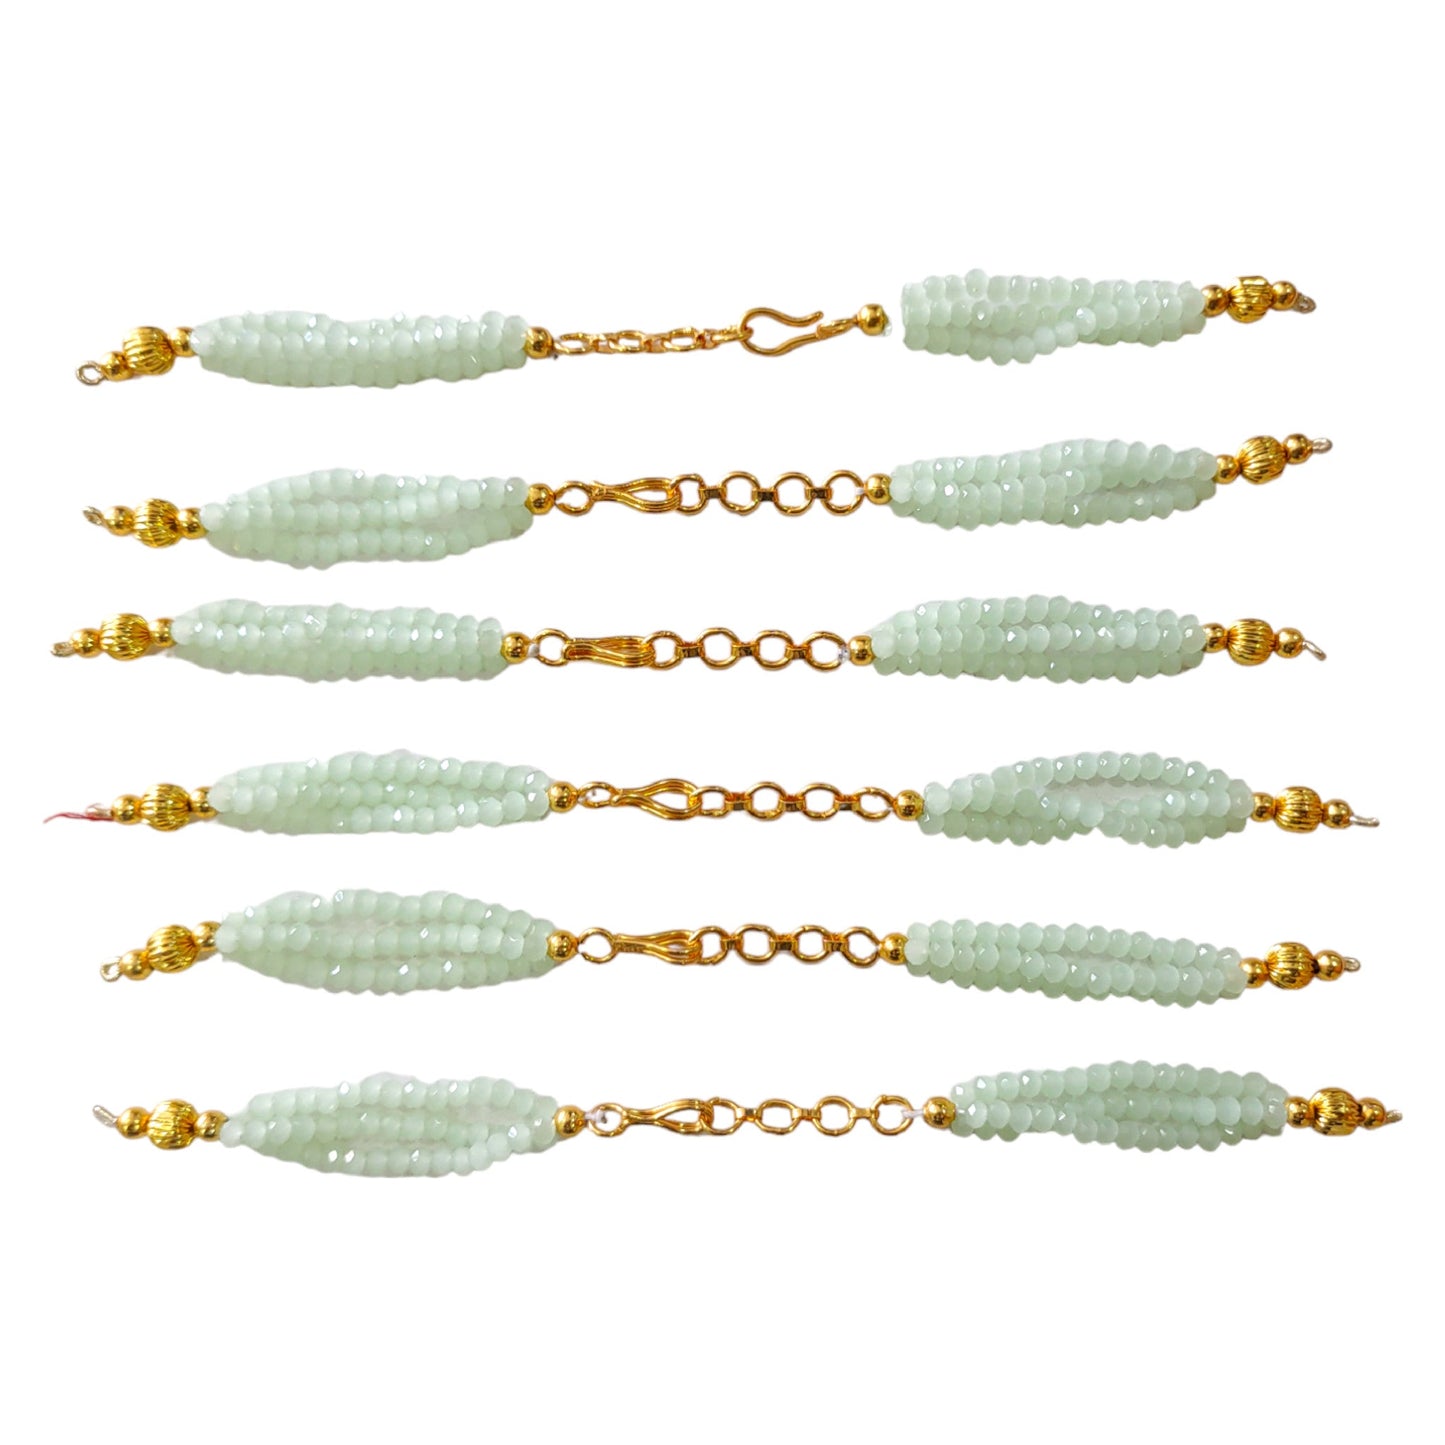 16.5cm. Beaded Stone Bracelet Metal Chain with Hook Lock For Craft Or Decor - 10 Pcs